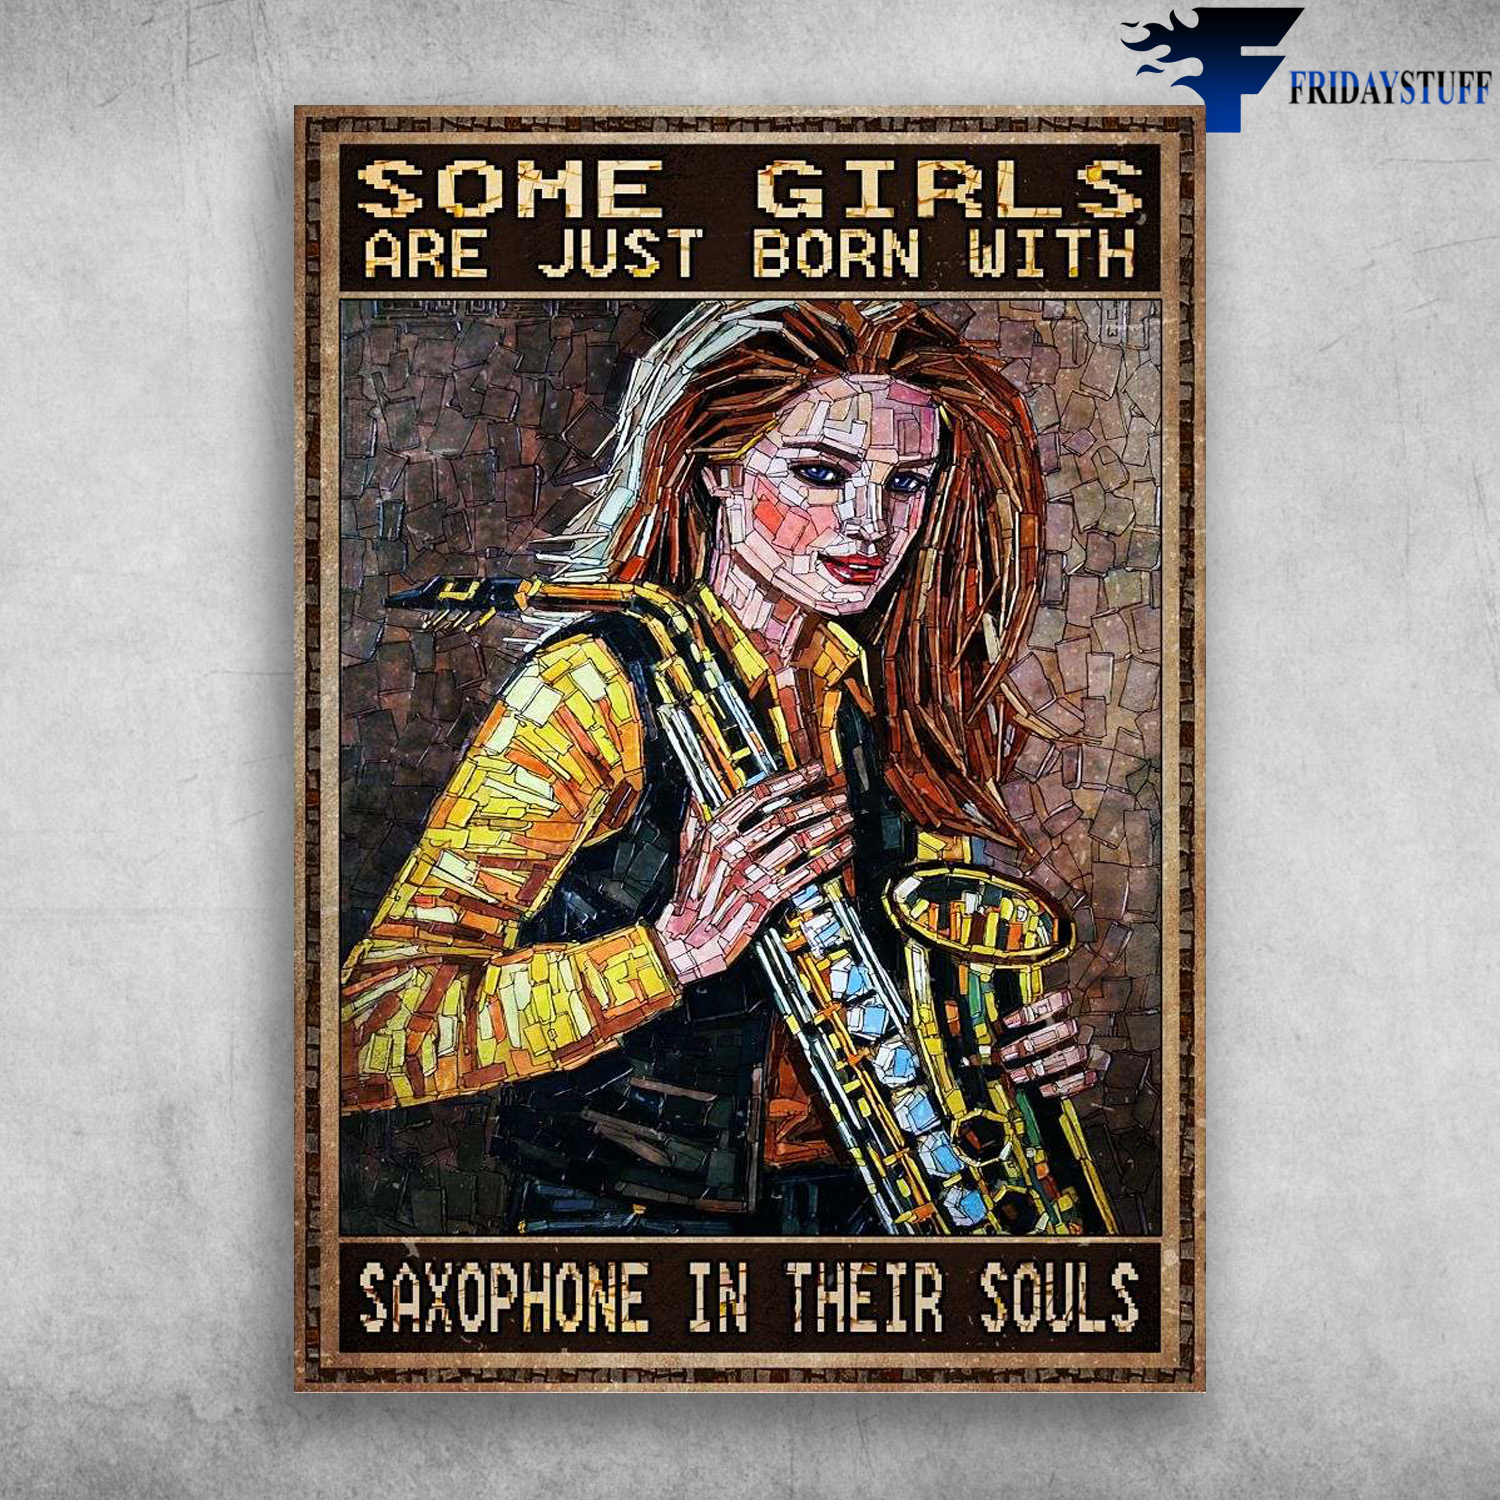 Saxophone Girl - Some Girls Are Just Born With, Saxophone In Their Souls